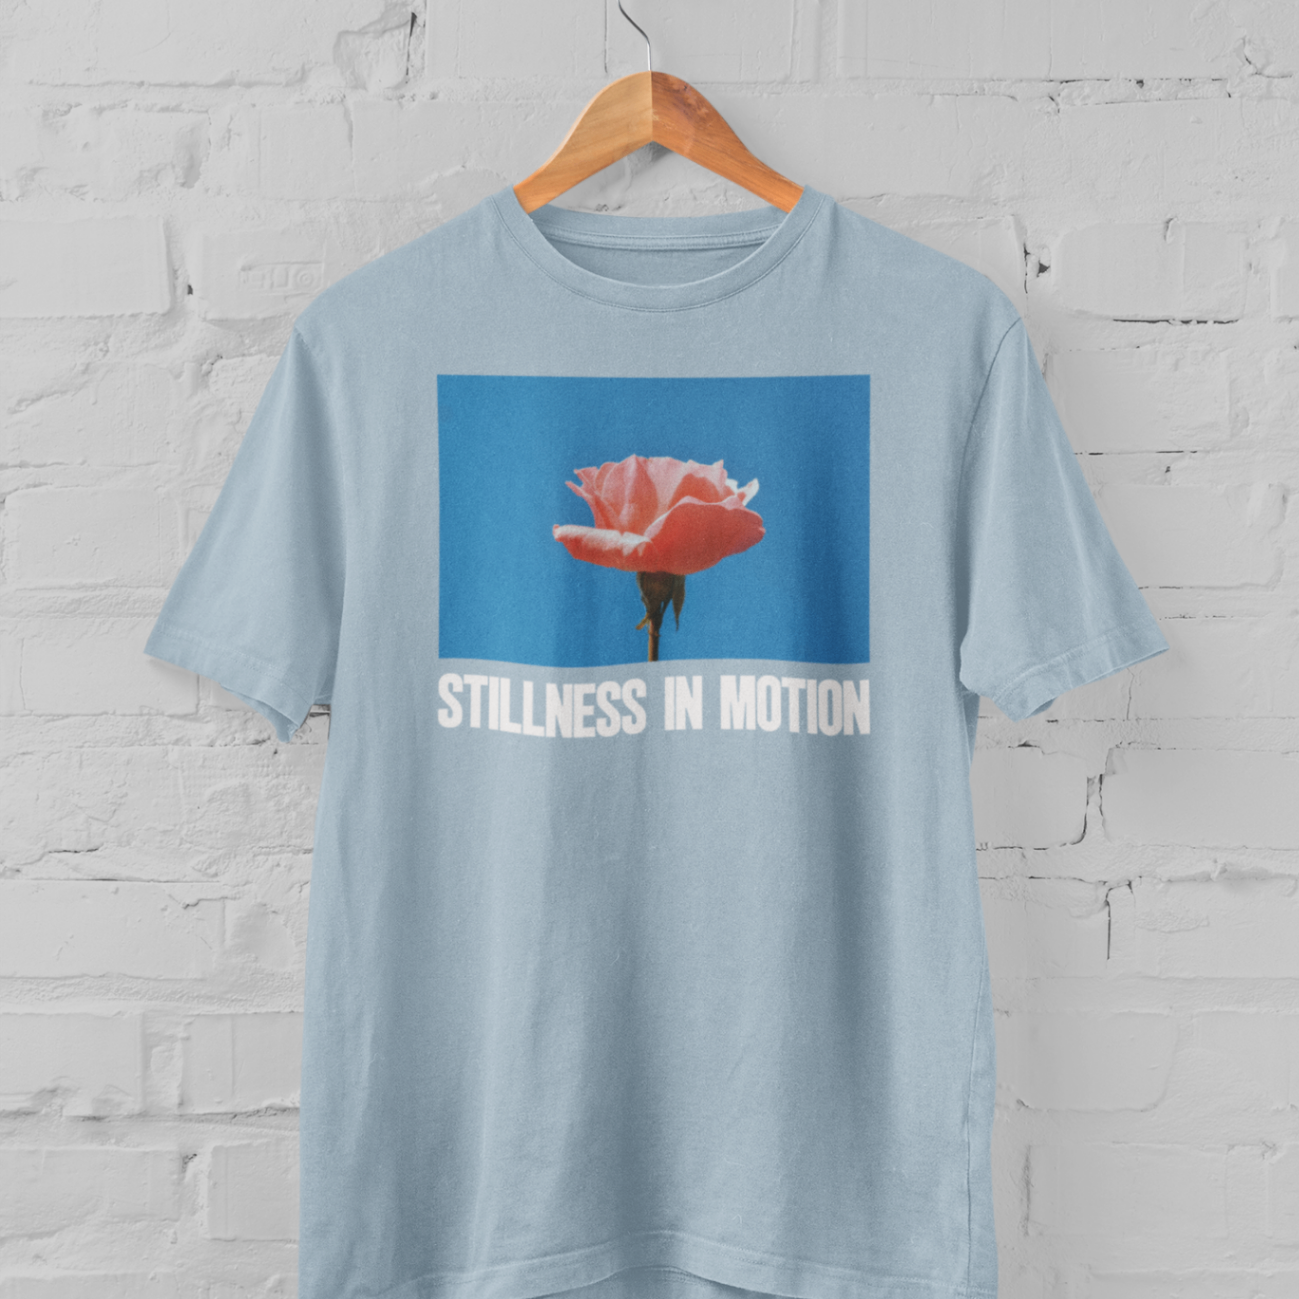 a light blue tshirt with stillness in motion written in text under a pink flower over a sky blue backround